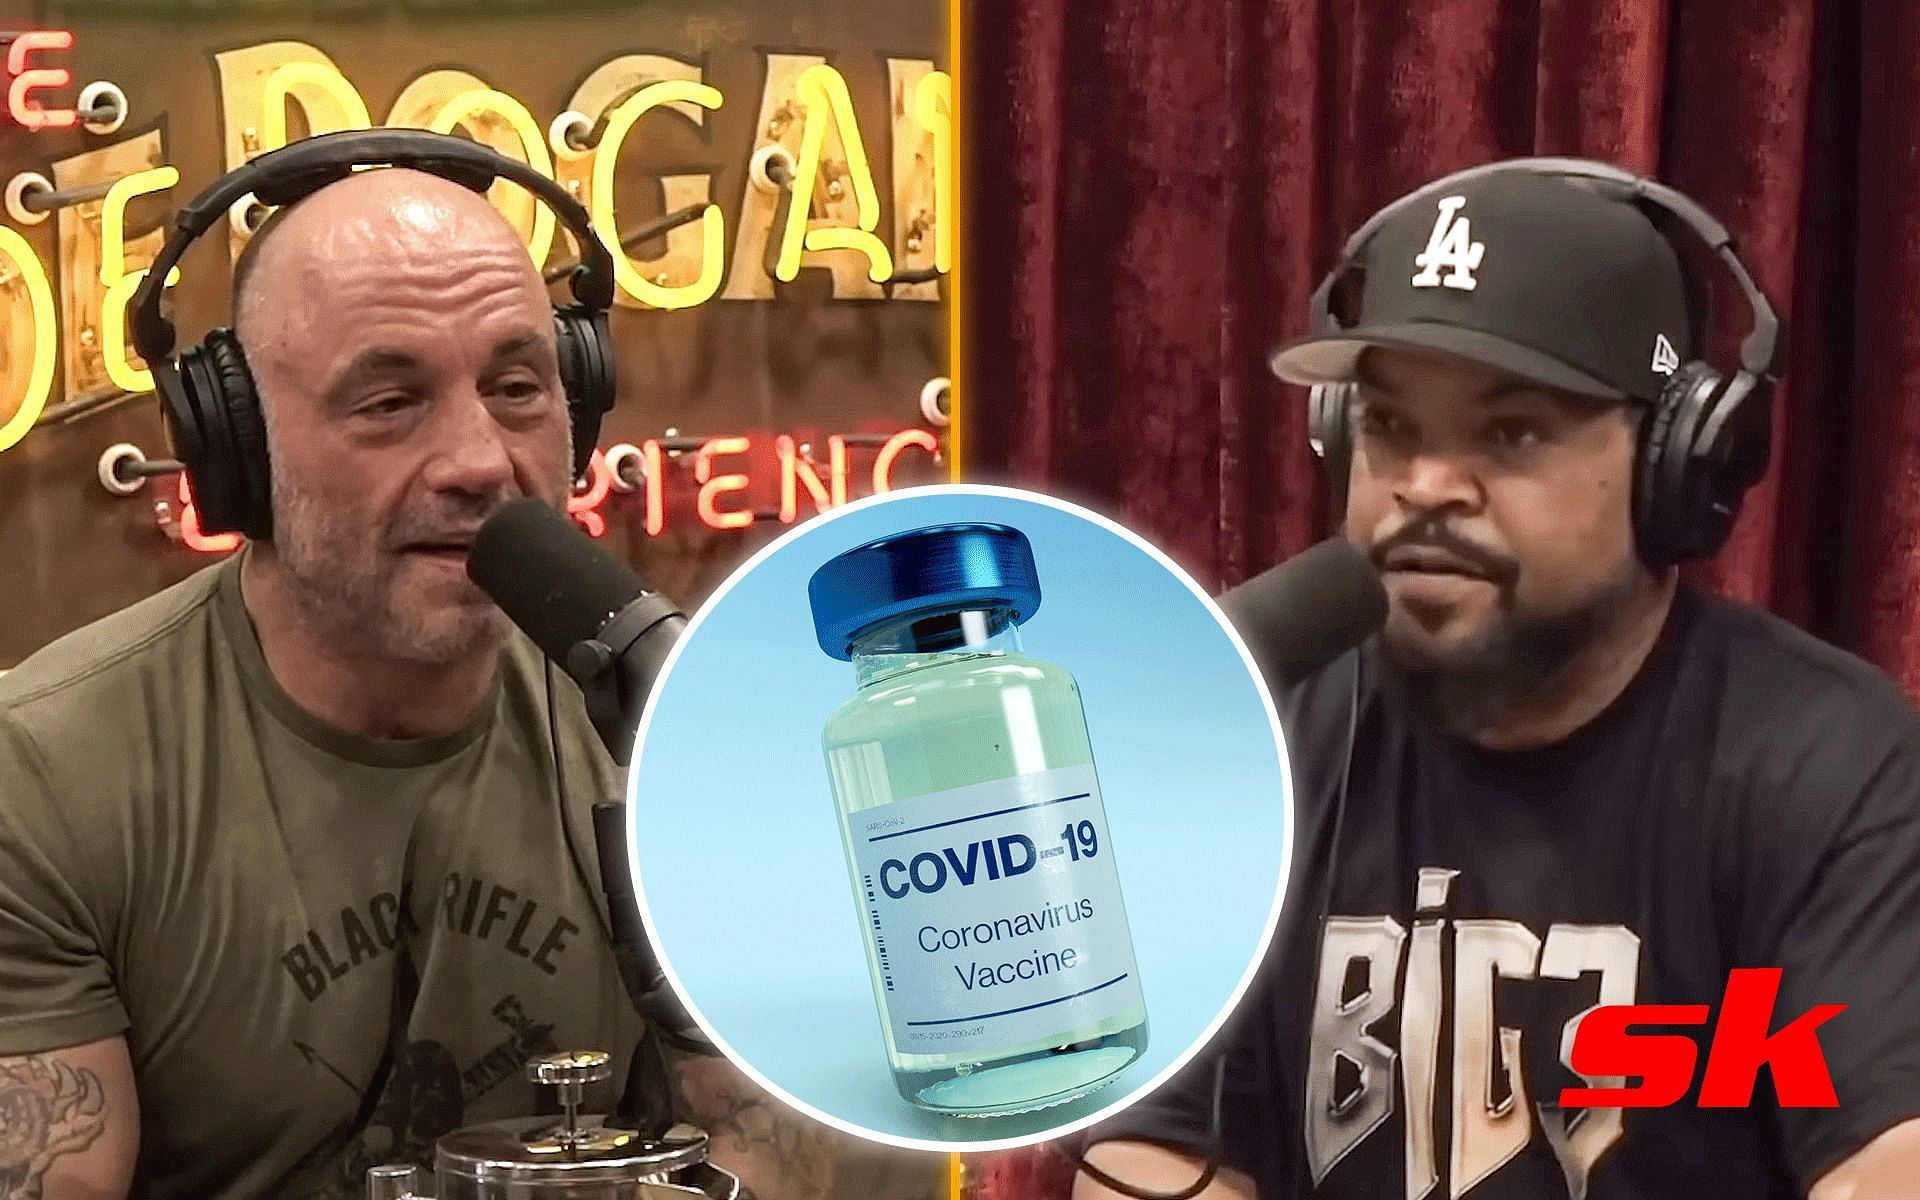 Joe Rogan and Ice Cube (Left and Right); COVID-19 vaccine representational image (Middle) [*Image courtesy: left and right images via MMA Sound YouTube channel; middle image via @random__images Twitter]